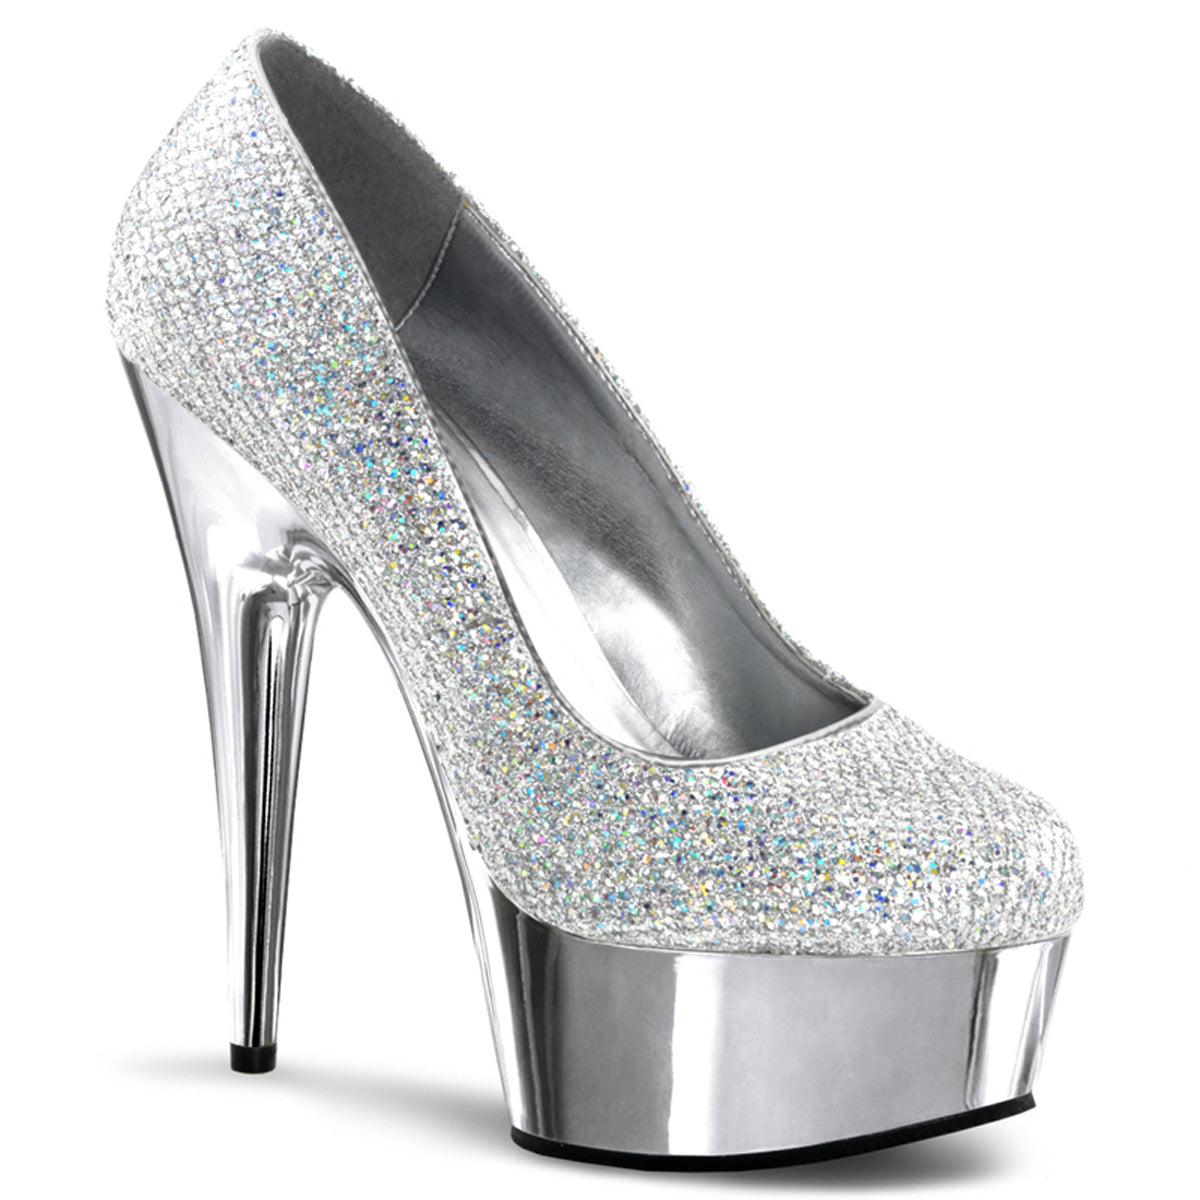 DELIGHT-685G 6" Heel Silver Glitter Pole Dancing Platforms-Pleaser- Sexy Shoes